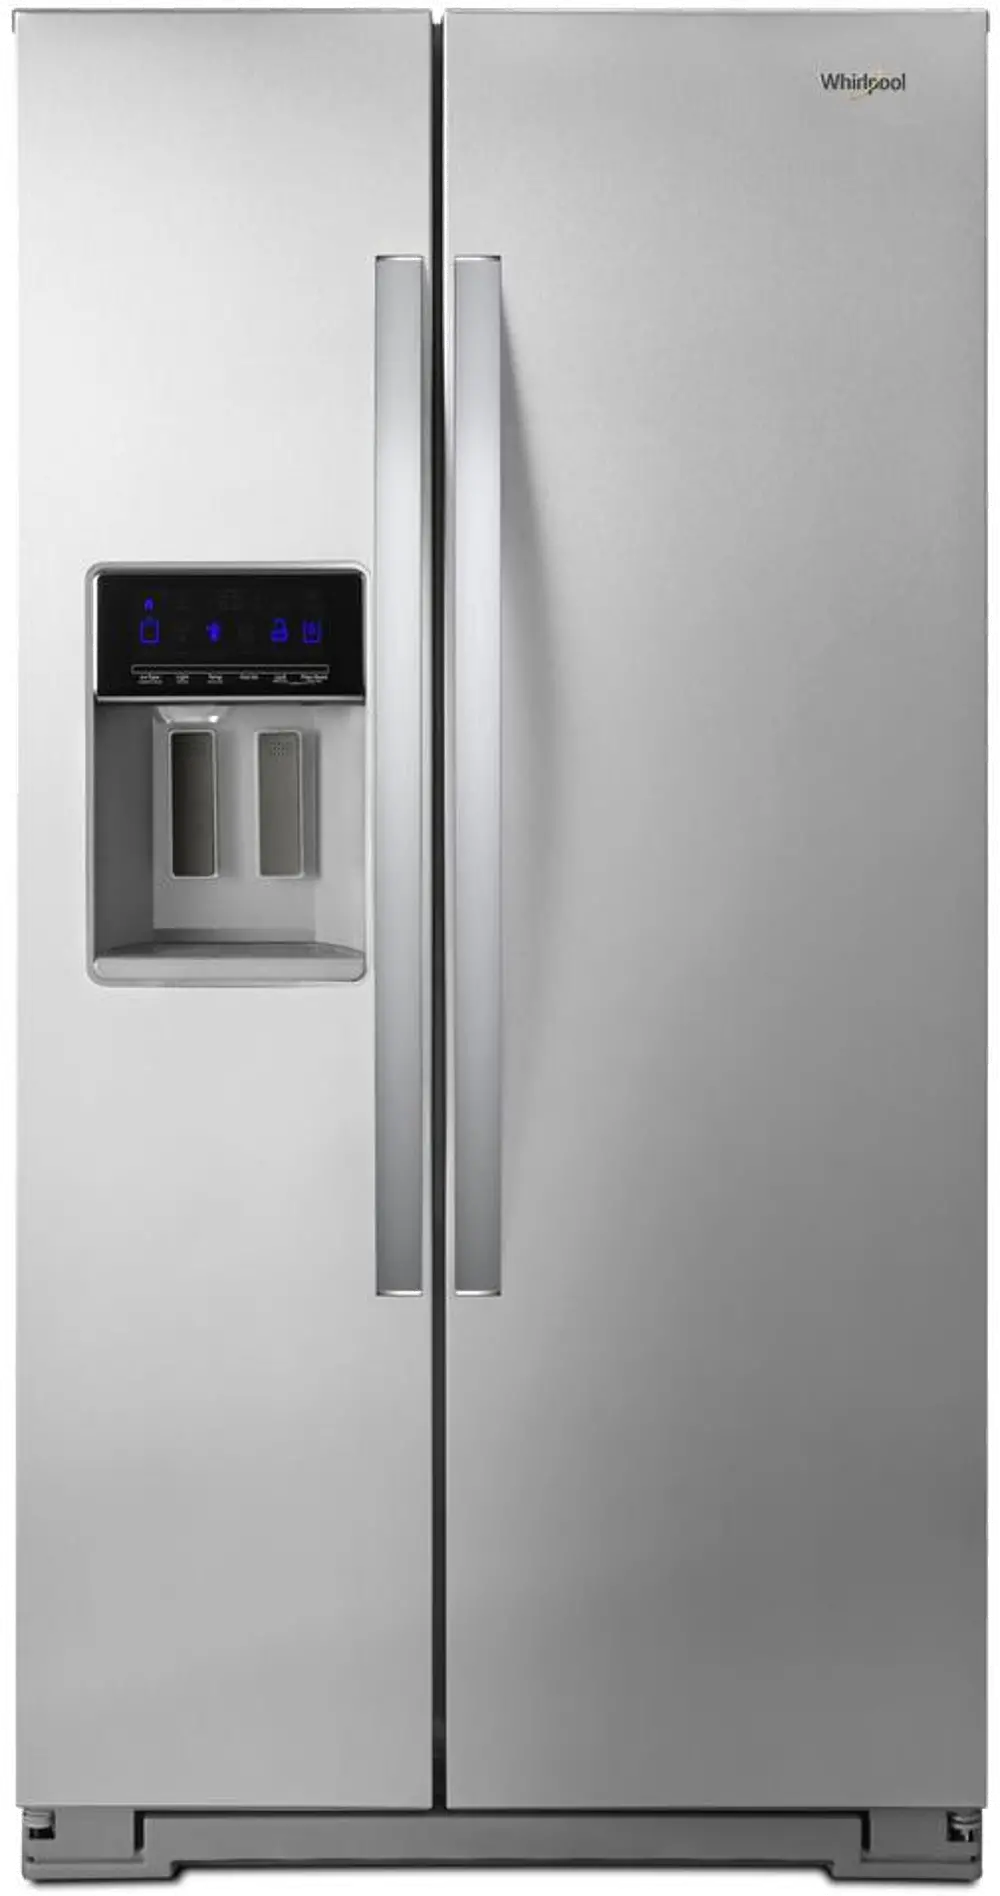 WRS571CIHZ Whirlpool 20.5 cu ft Side by Side Refrigerator - Counter Depth Stainless Steel-1